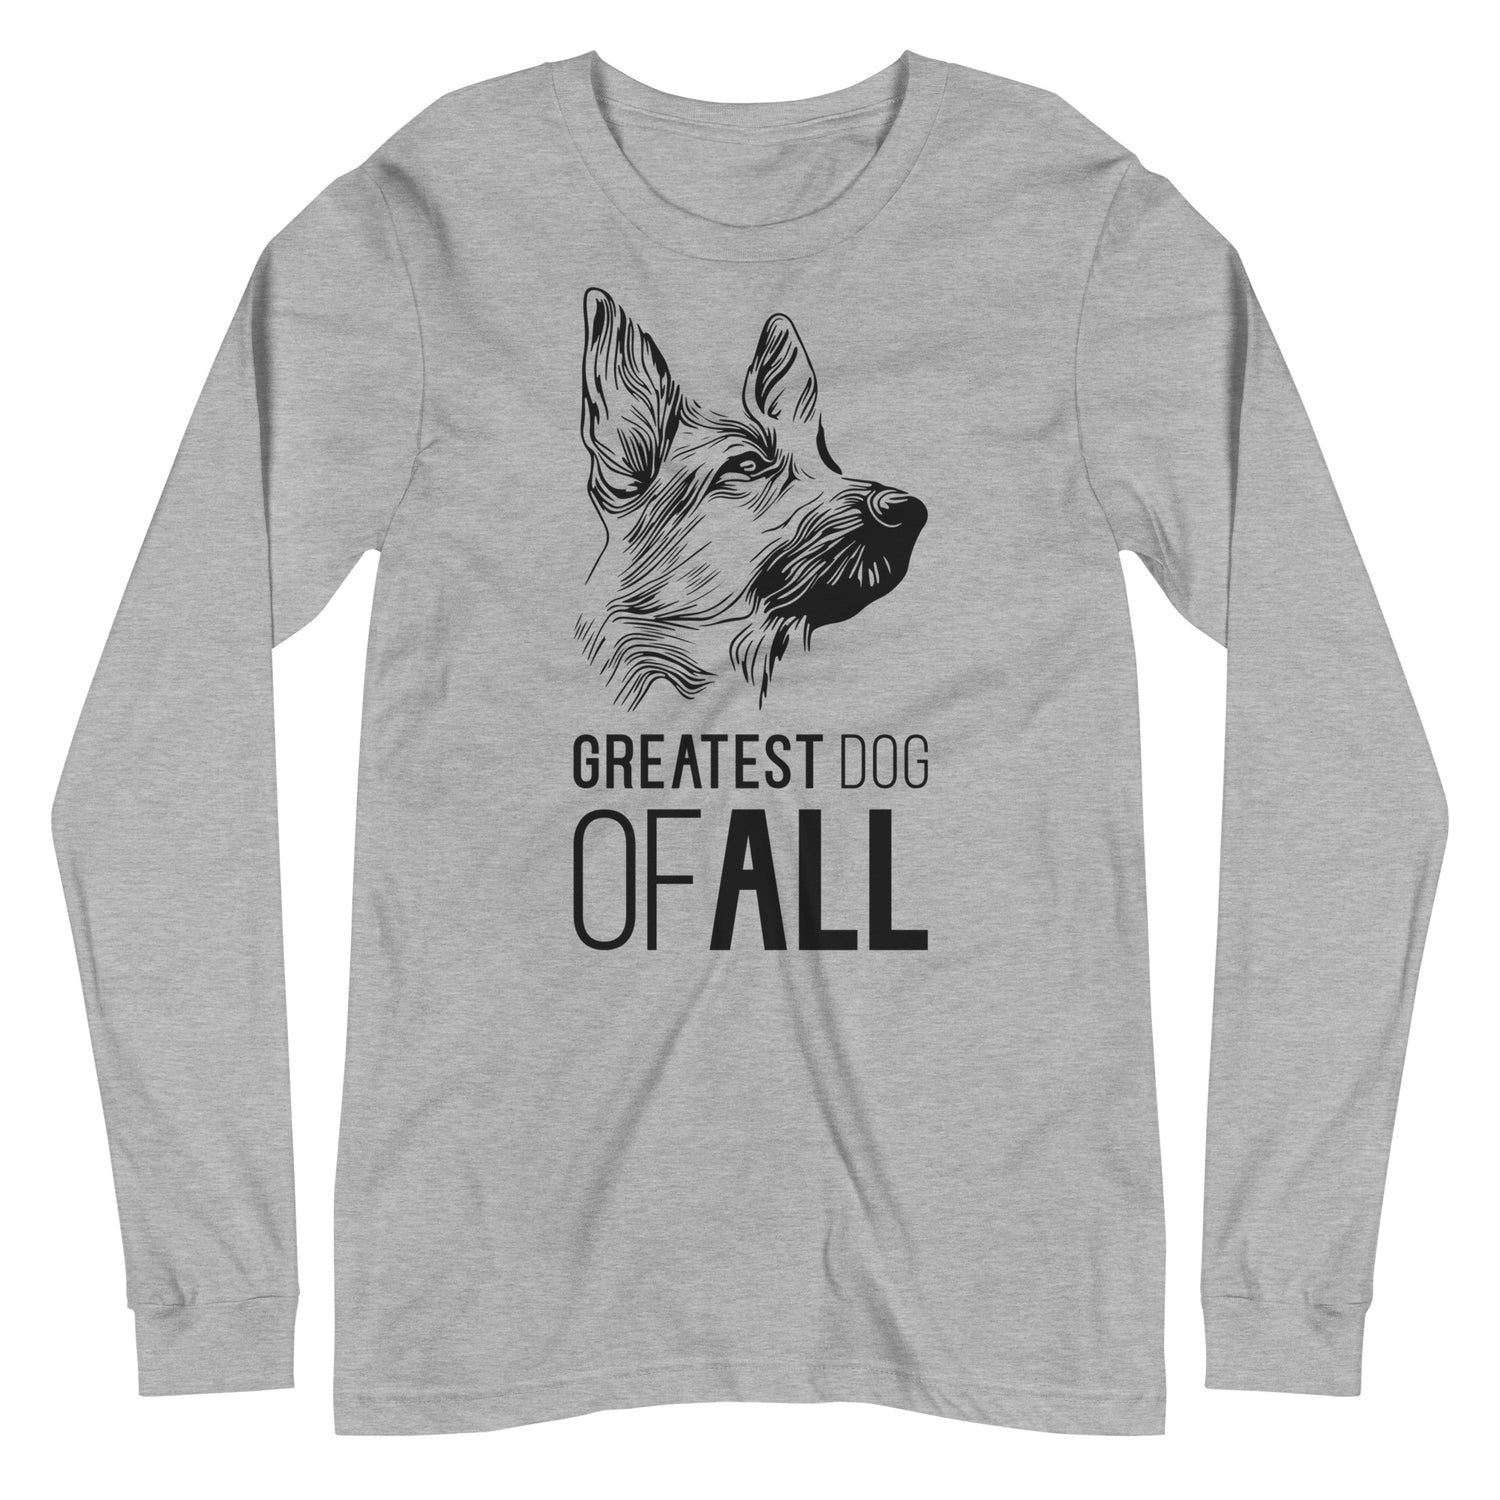 Black German Shepherd face silhouette with Greatest Dog of All caption on unisex athletic heather long sleeve t-shirt